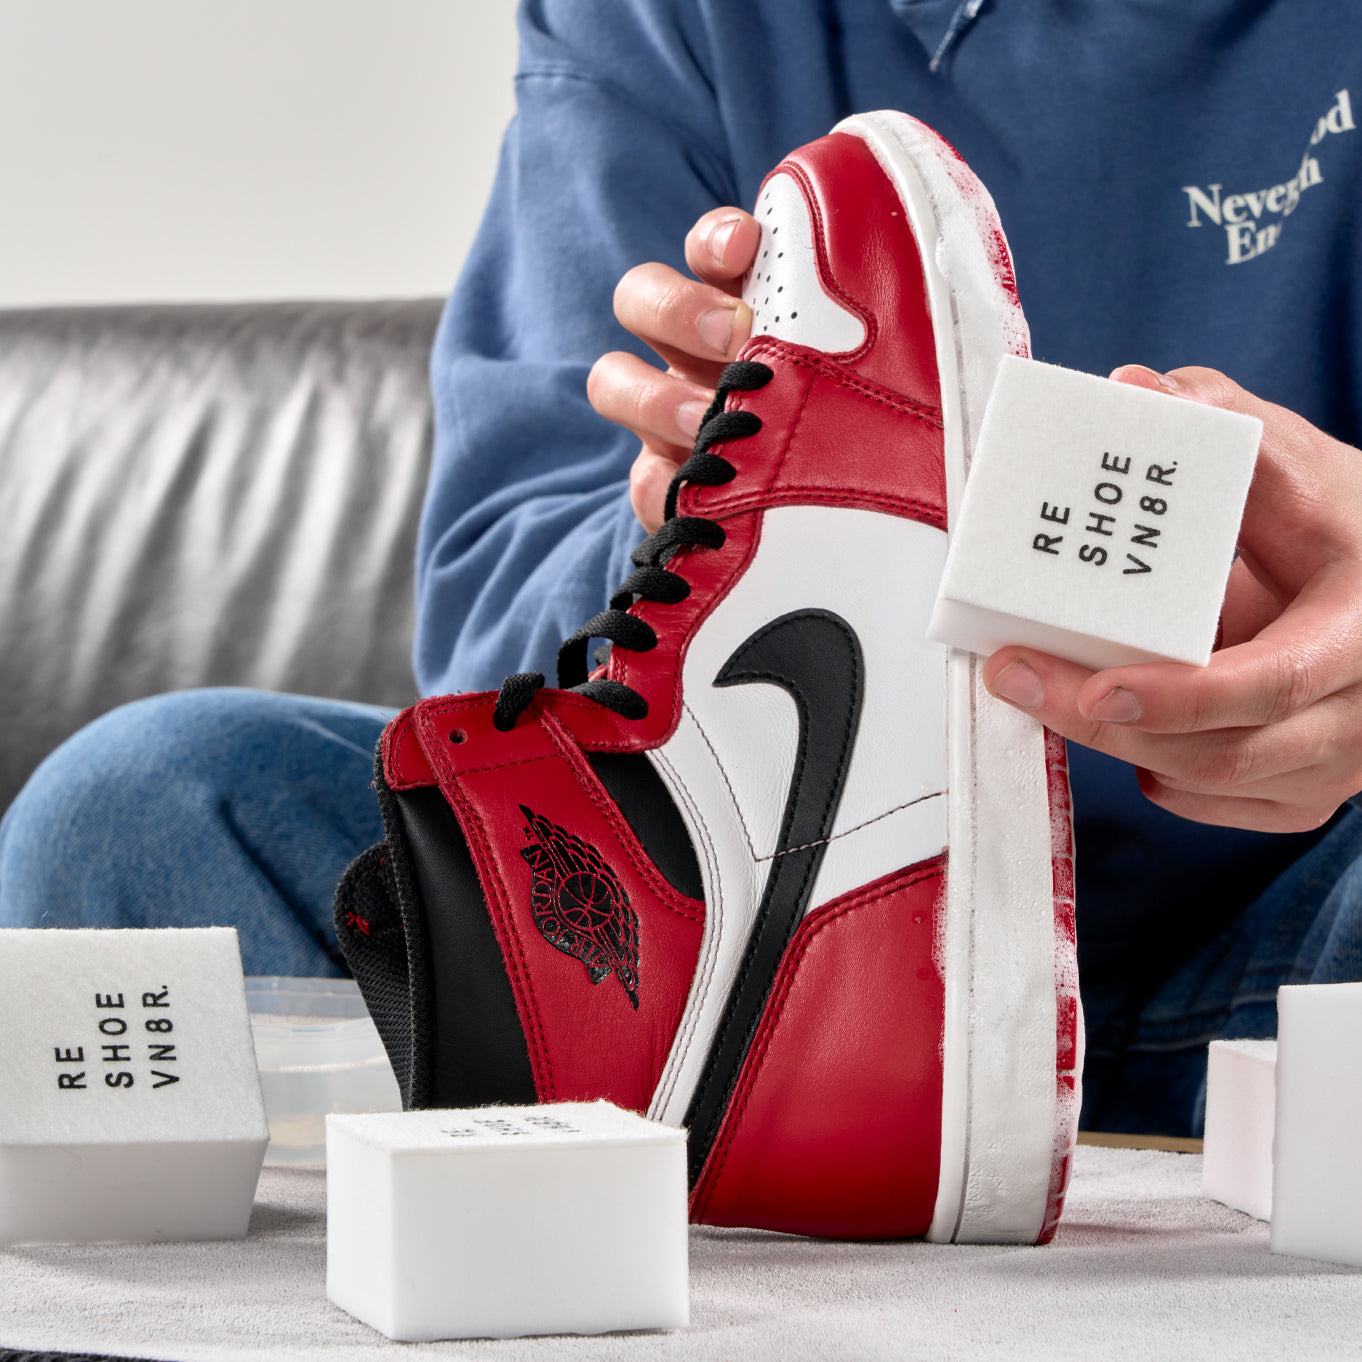 2 hands cleaning a black red and white Nike Air Jordan 1 sneaker. Table has numerous shoe cleaning sponges on it. Sponge says "RESHOEVN8R".